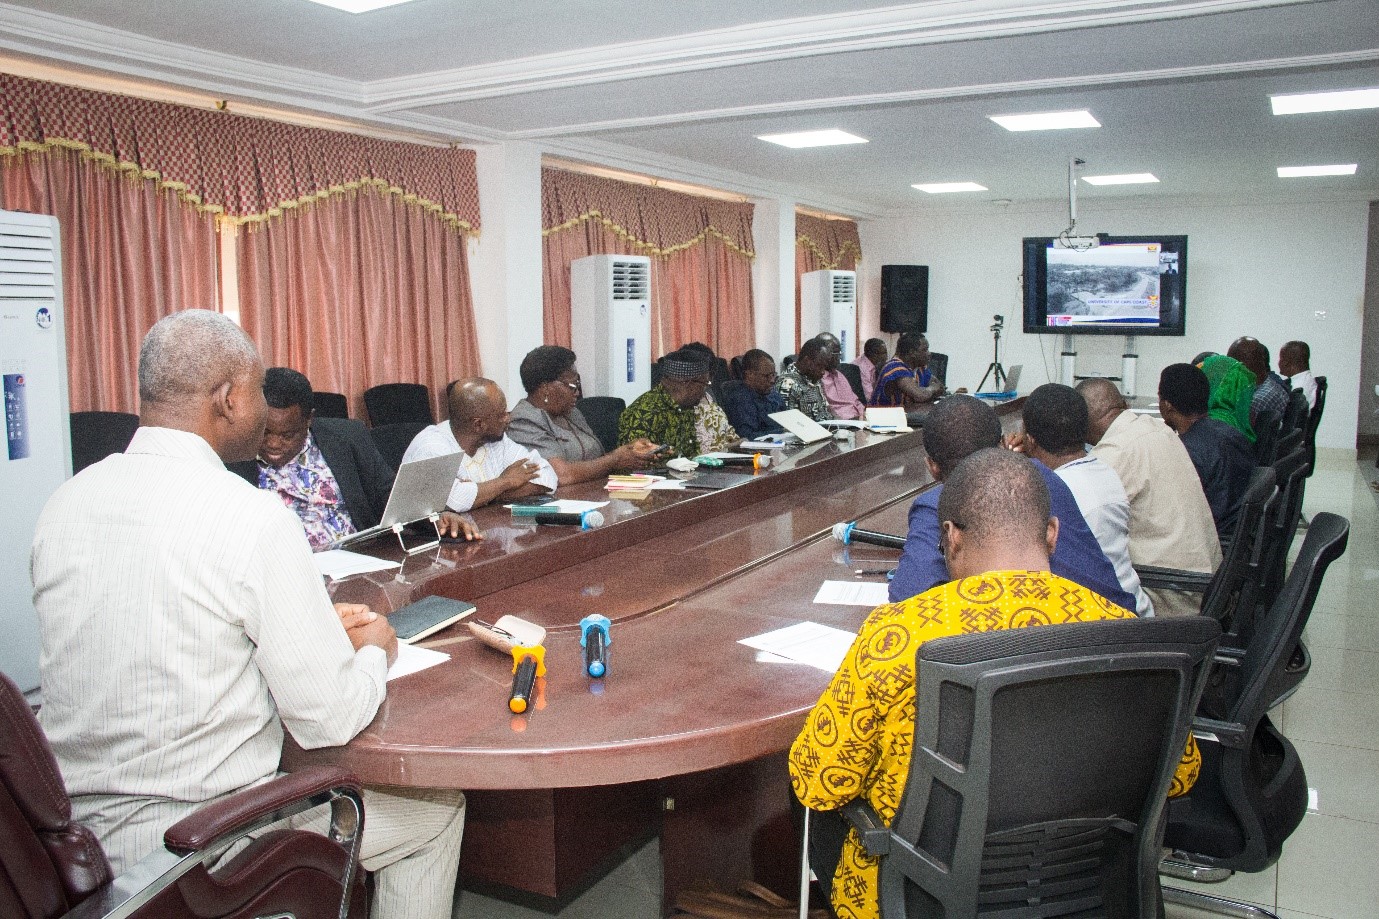 CRIPS-UDS Organizes Workshop On Building An Efficient Research And Grants Administration And Management System